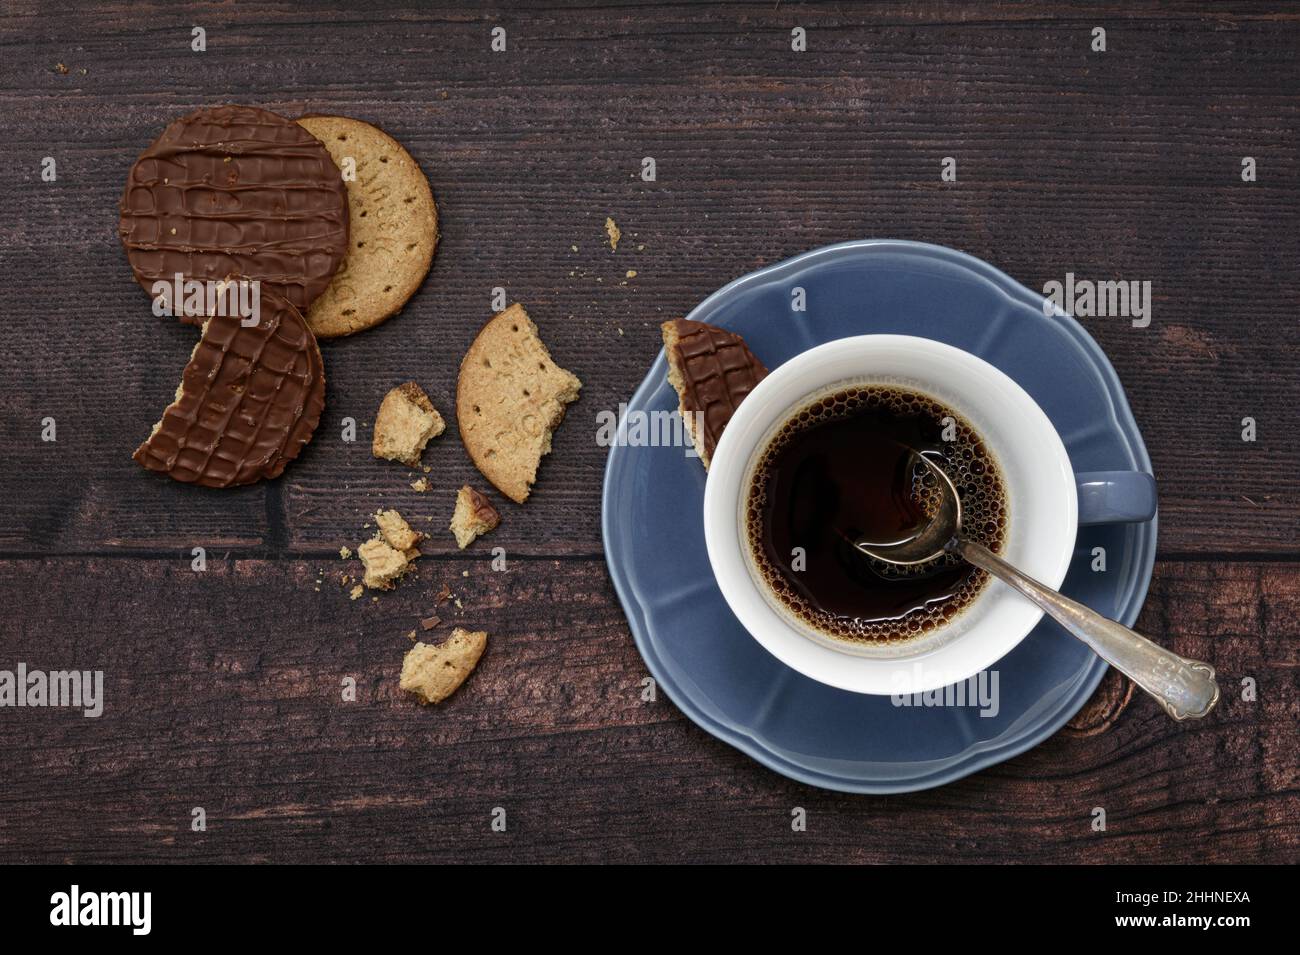 Coffee and biscuits Stock Photo